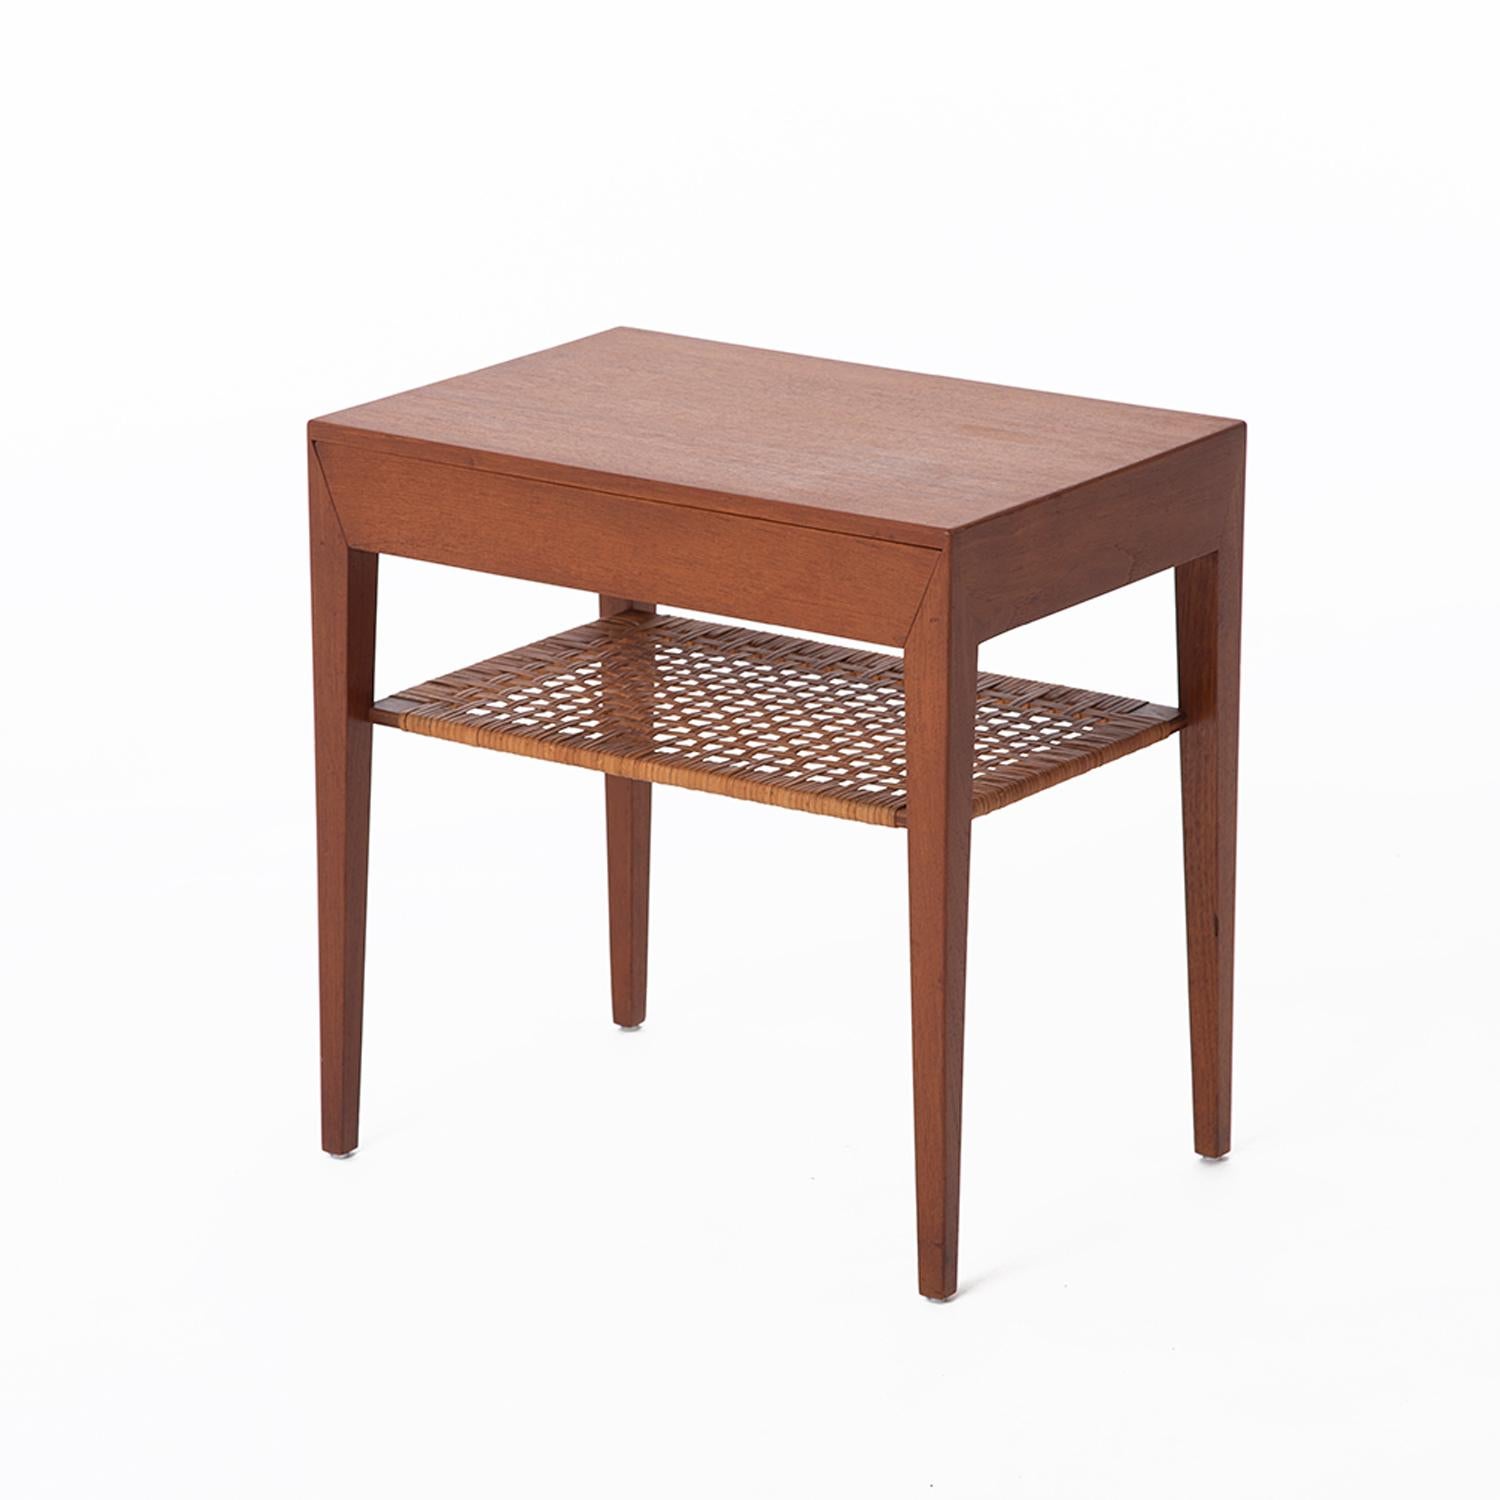 Danish modern teak occasional table with single drawer and caned shelf. Design by Severin Hansen for Haslev Mobelsnedkeri. 


Professional, skilled furniture restoration is an integral part of what we do every day. Our goal is to provide